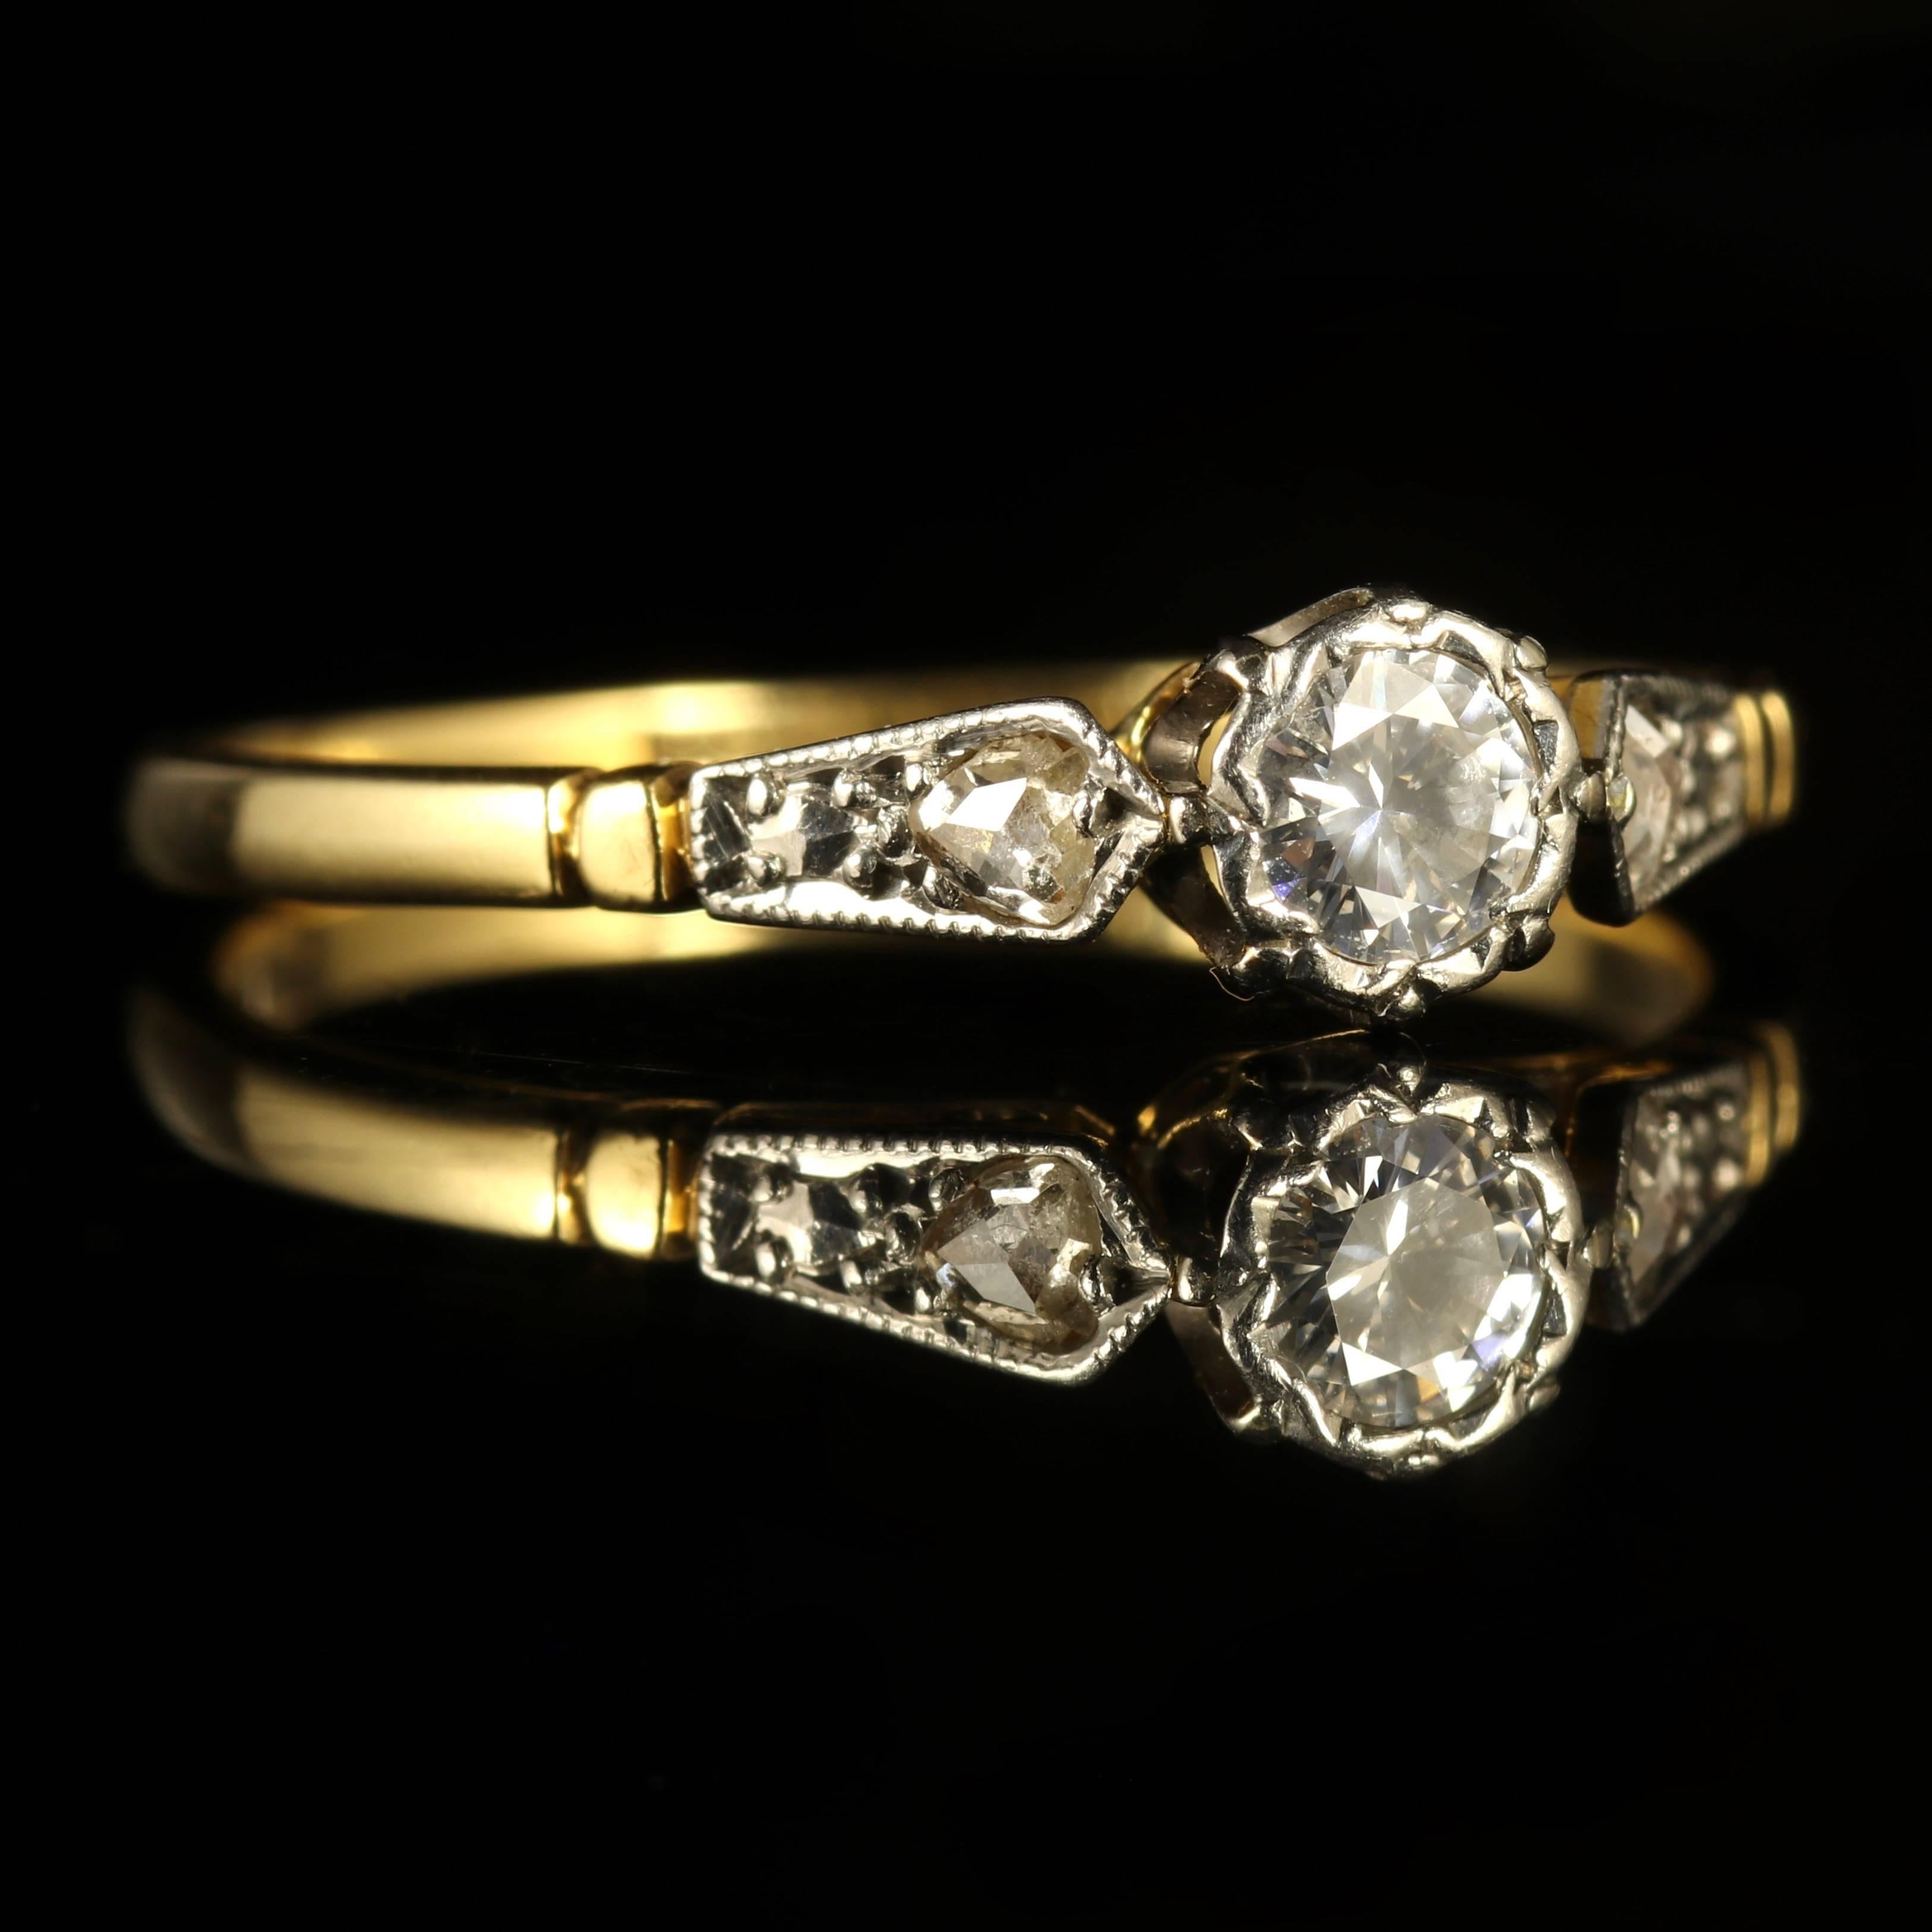 This fabulous 18ct Yellow Gold and Platinum engagement ring is genuine Edwardian Circa 1914.

Set with a lovely old cut Diamond in the centre.

The Diamond is approx. 0.20ct and SI 1 H colour.

Diamonds that chase down the shoulders of this lovely